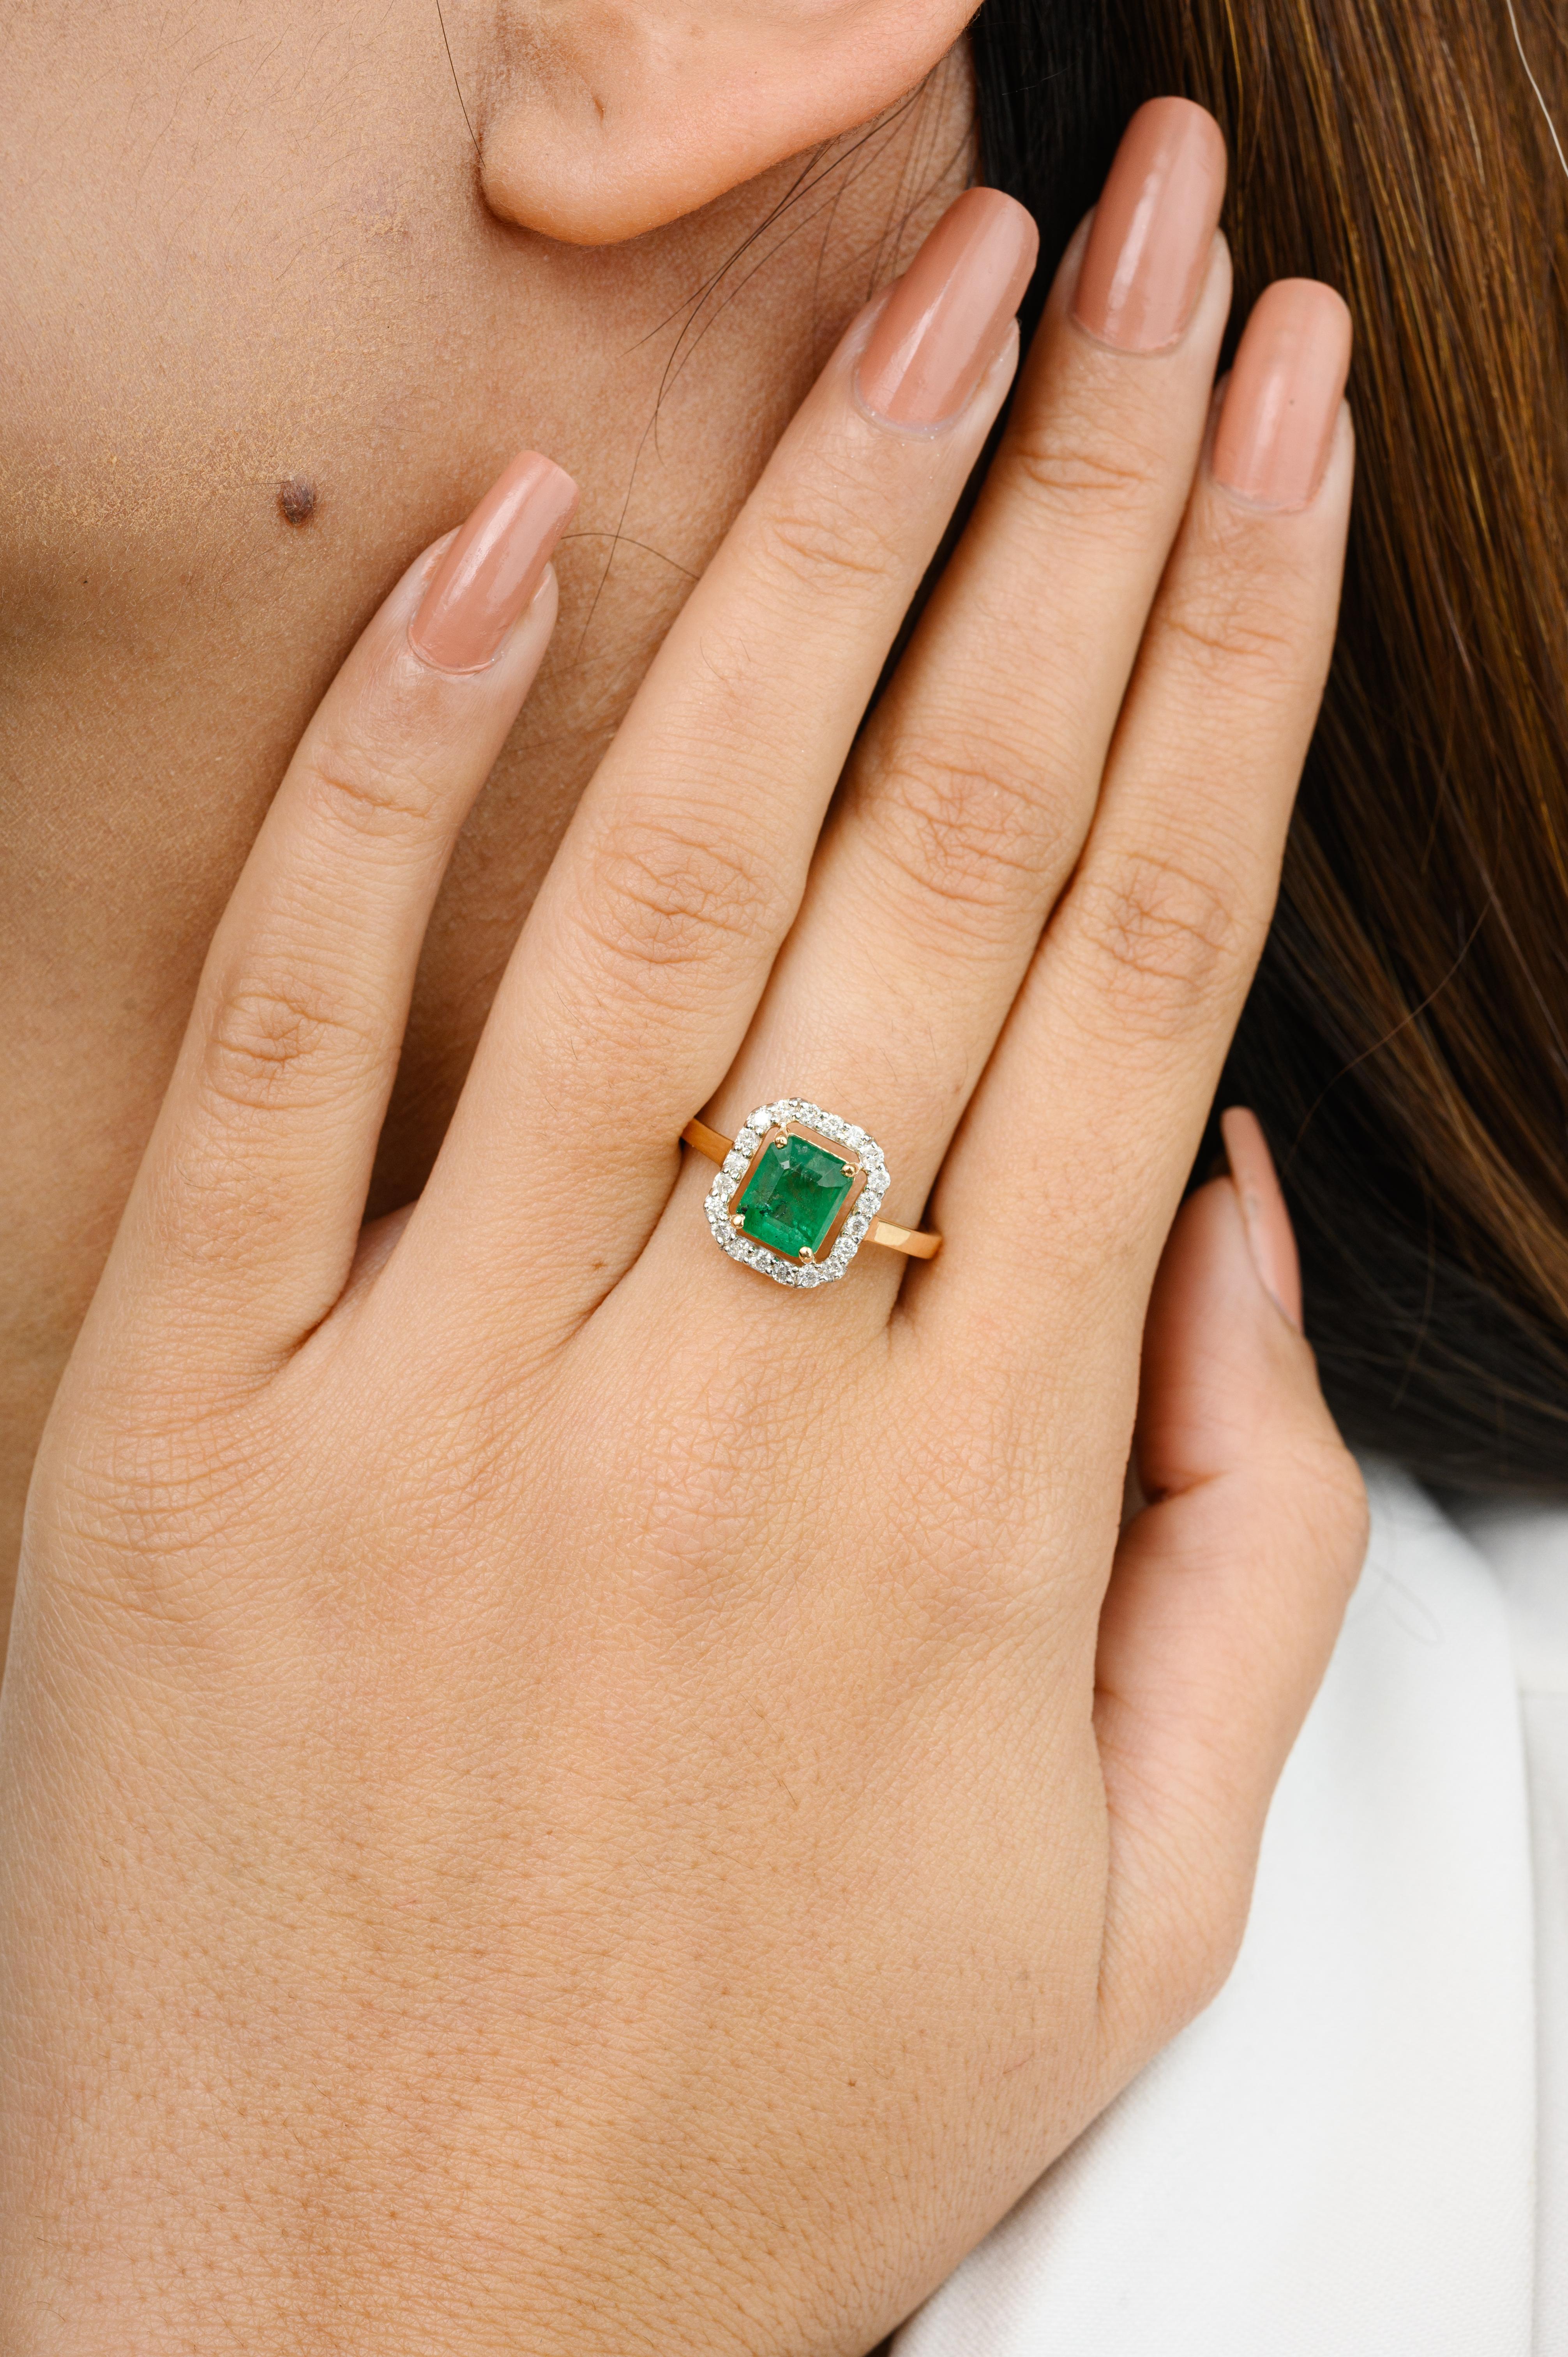 For Sale:  1.5 Carat Octagon Emerald Halo Diamond Wedding Ring in 18k Yellow Gold 4